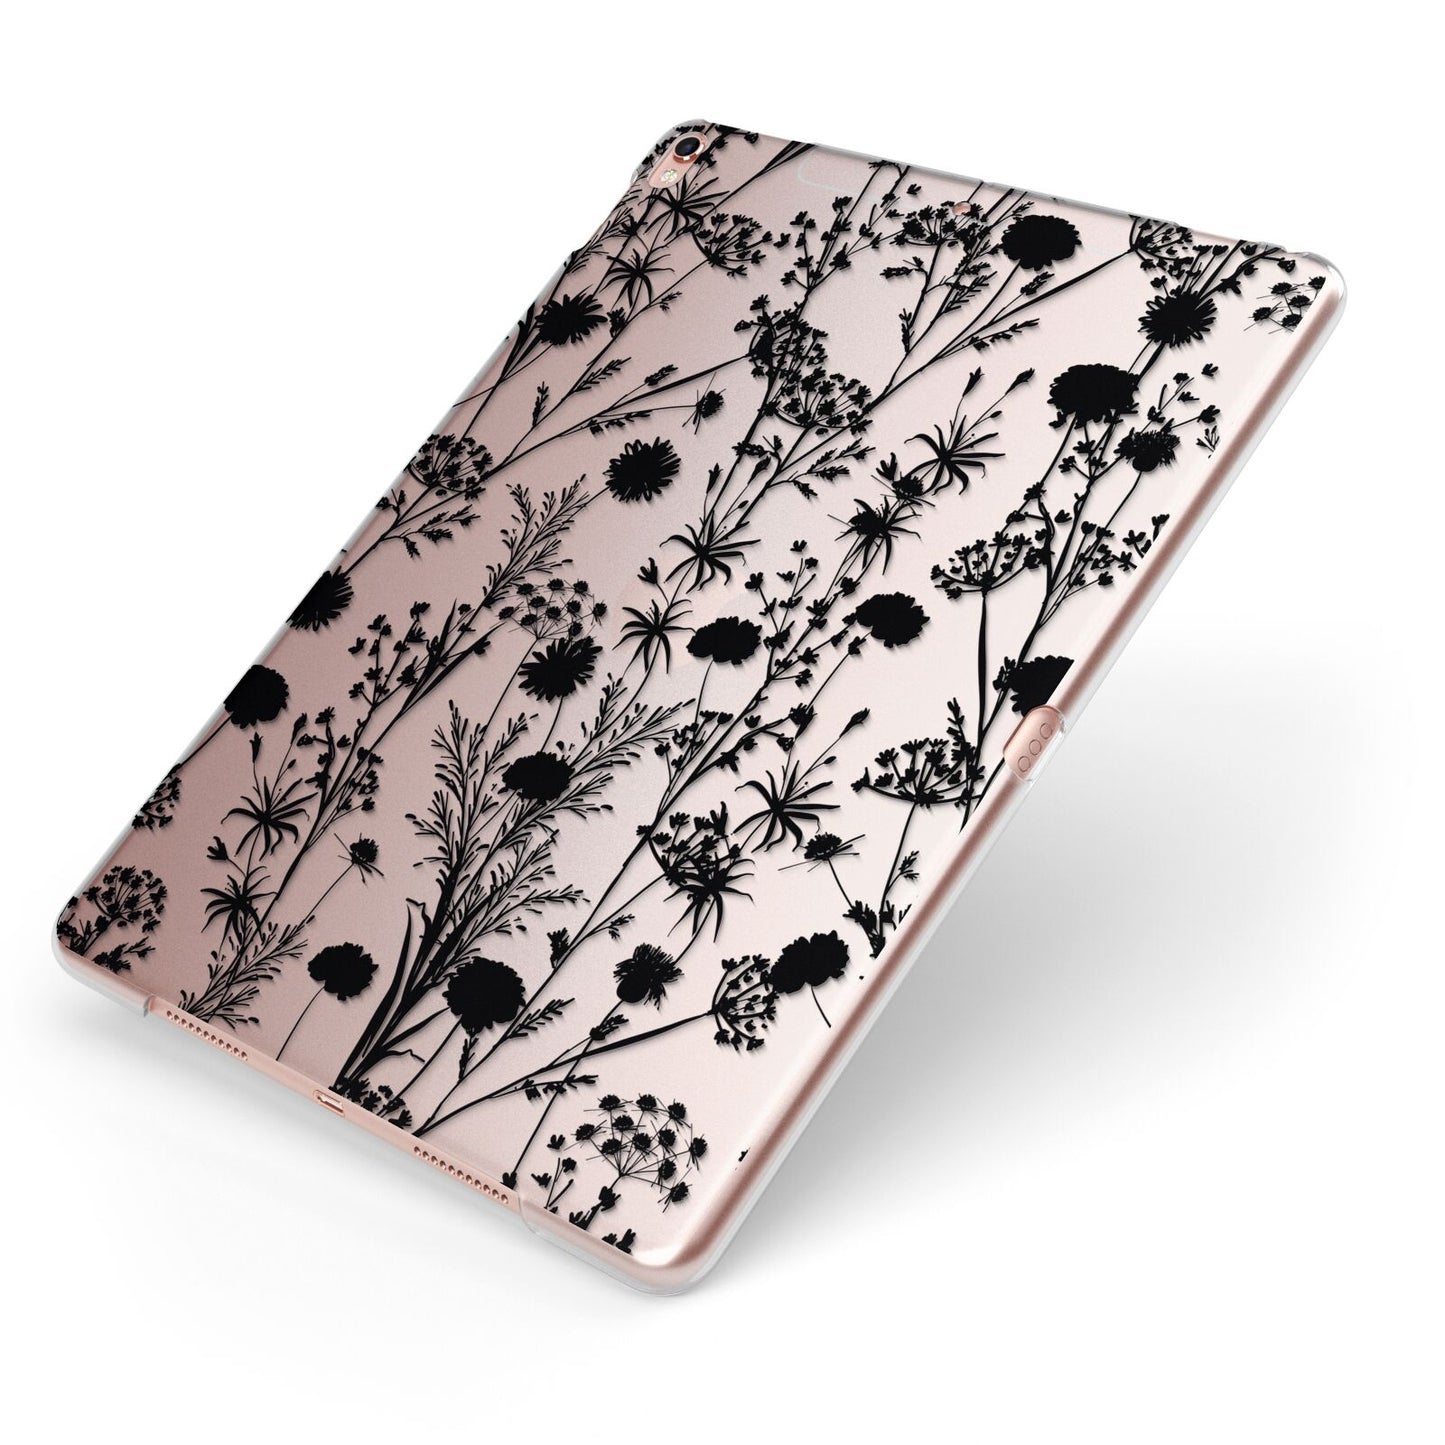 Black Floral Meadow Apple iPad Case on Rose Gold iPad Side View